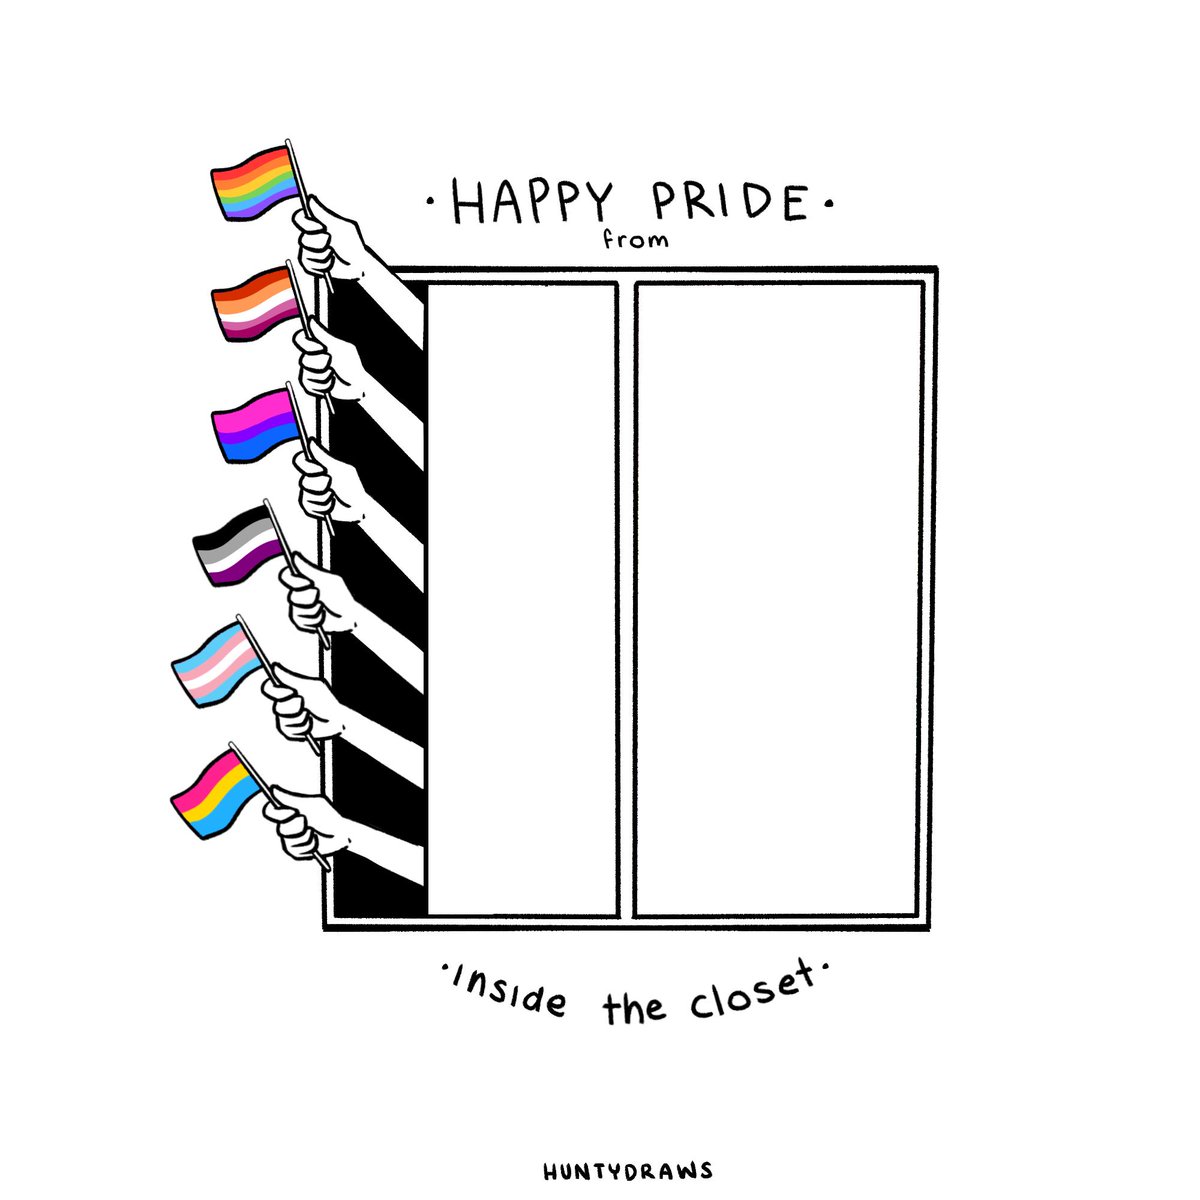 Happy #pridemonth to everybody in the closet! For whatever reason you aren't out, you deserve to enjoy pride all the same! 